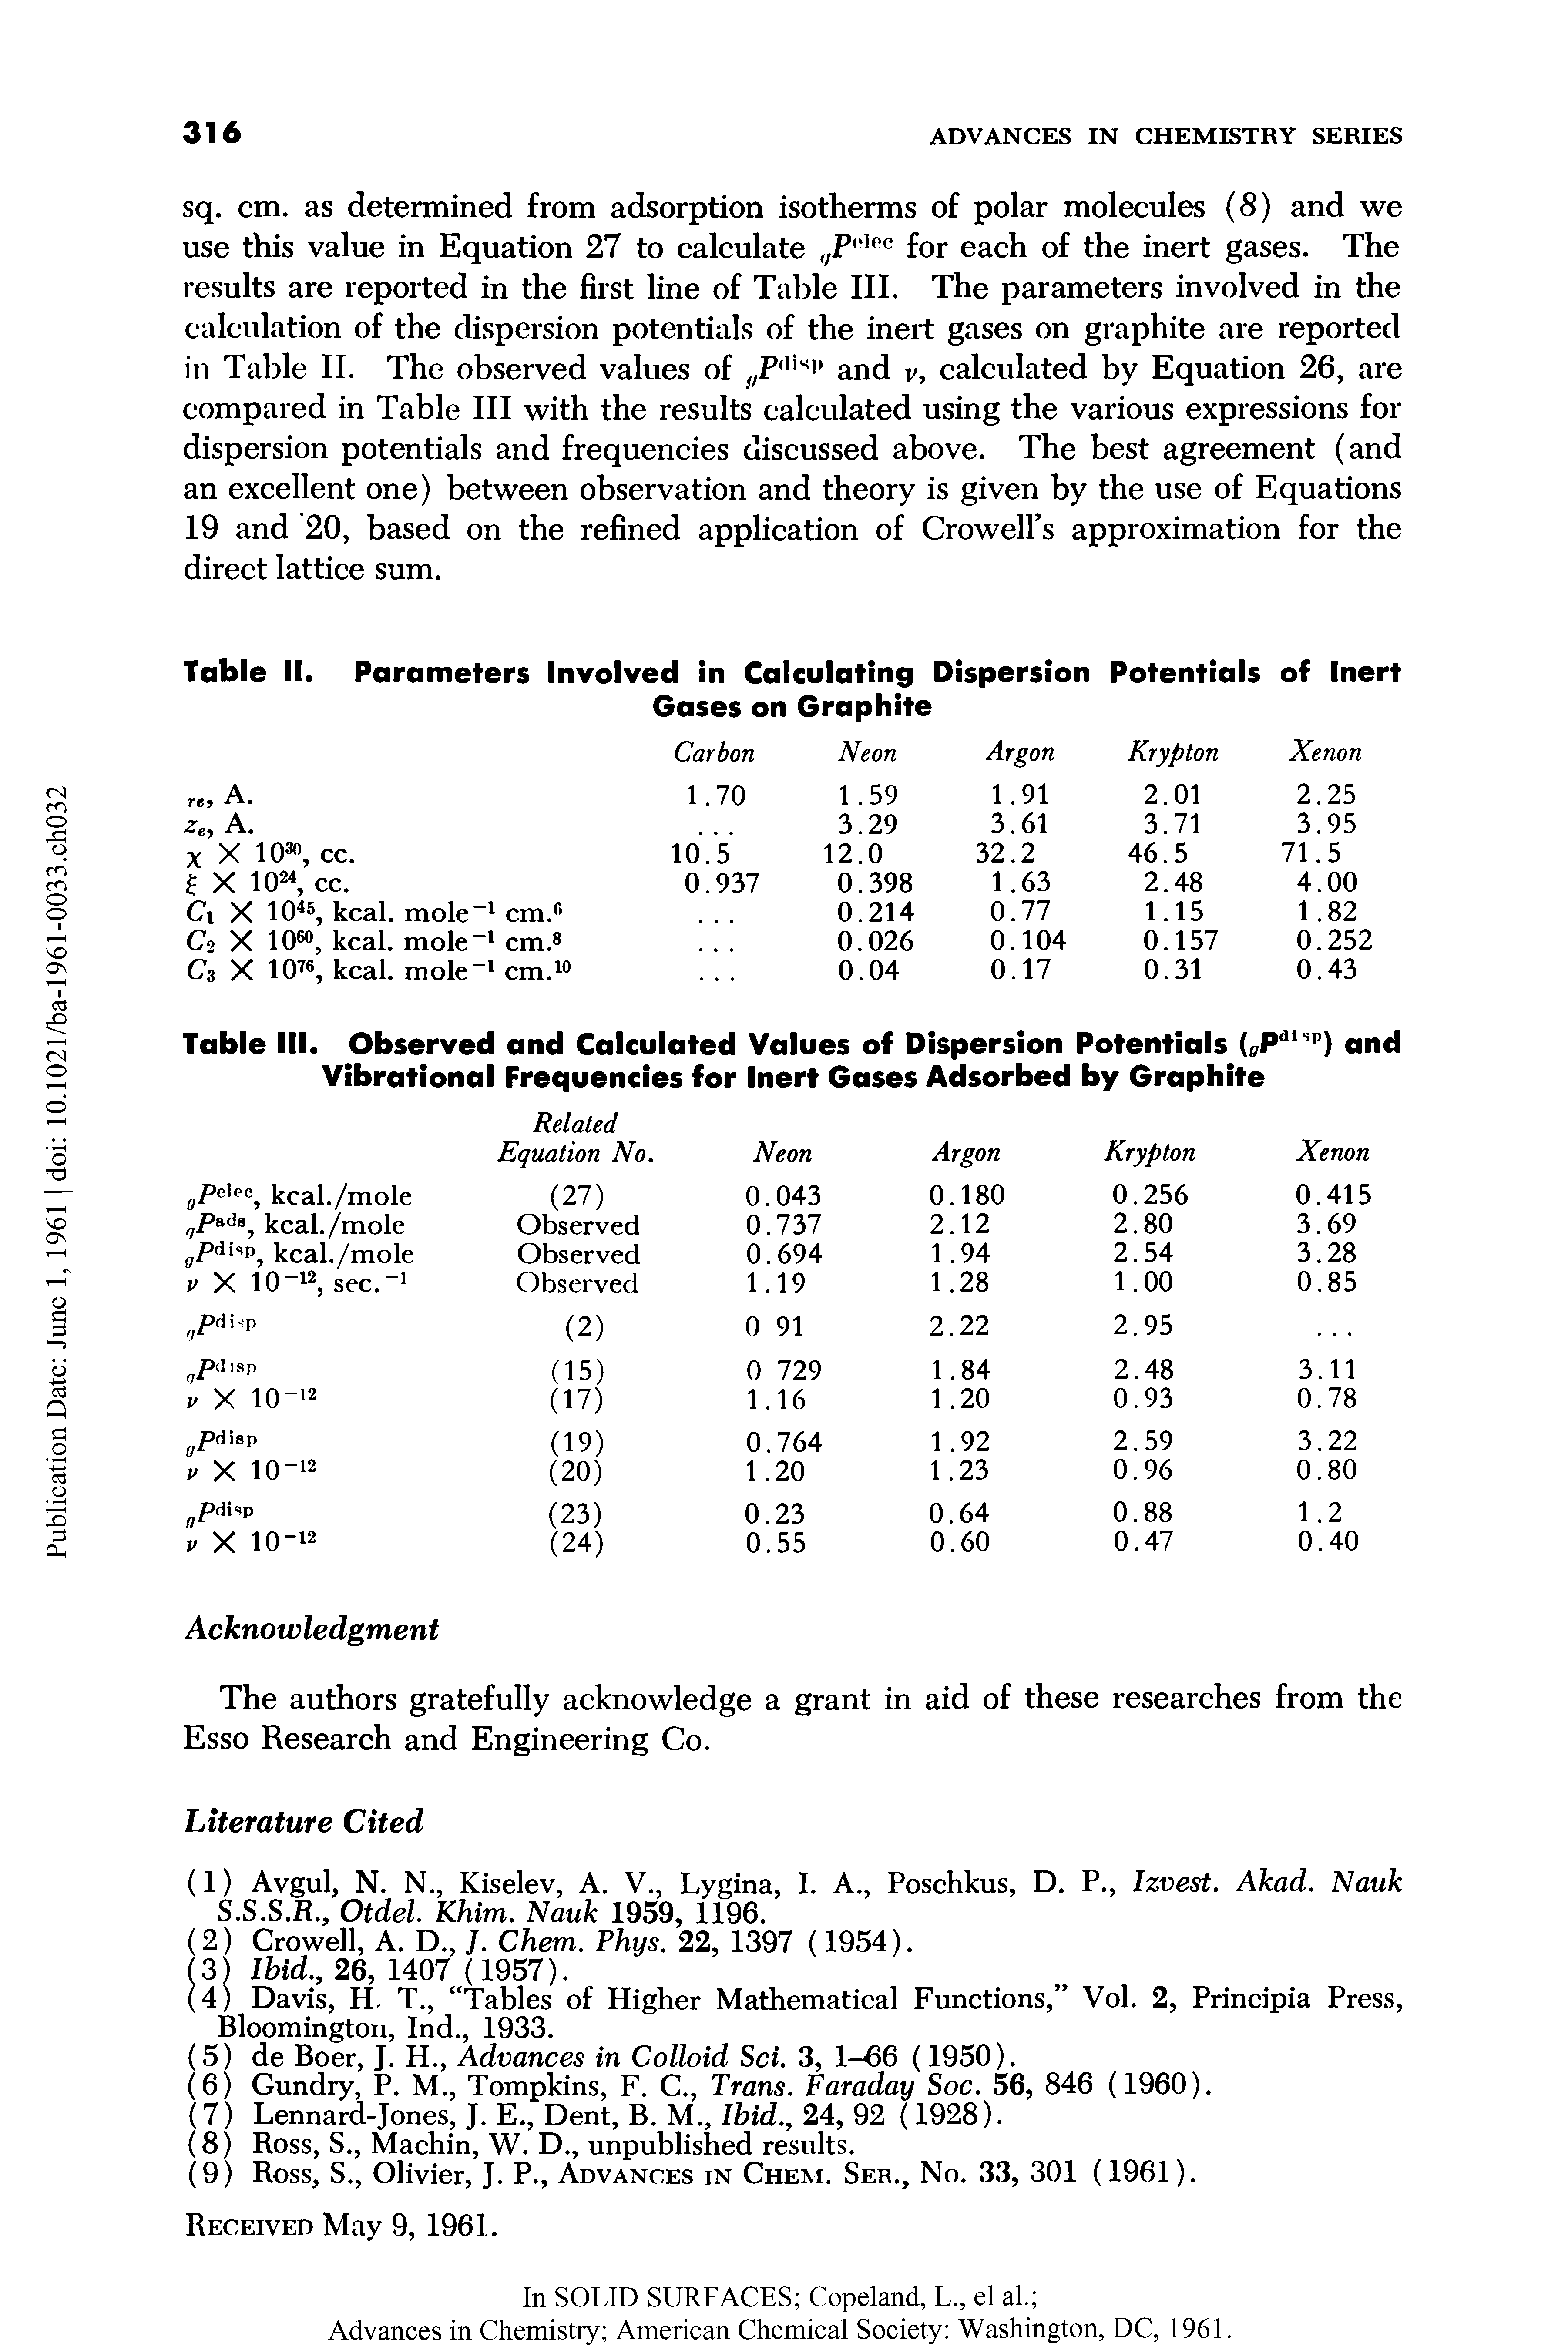 Table II. Parameters Involved in Calculating Dispersion Potentials of Inert...